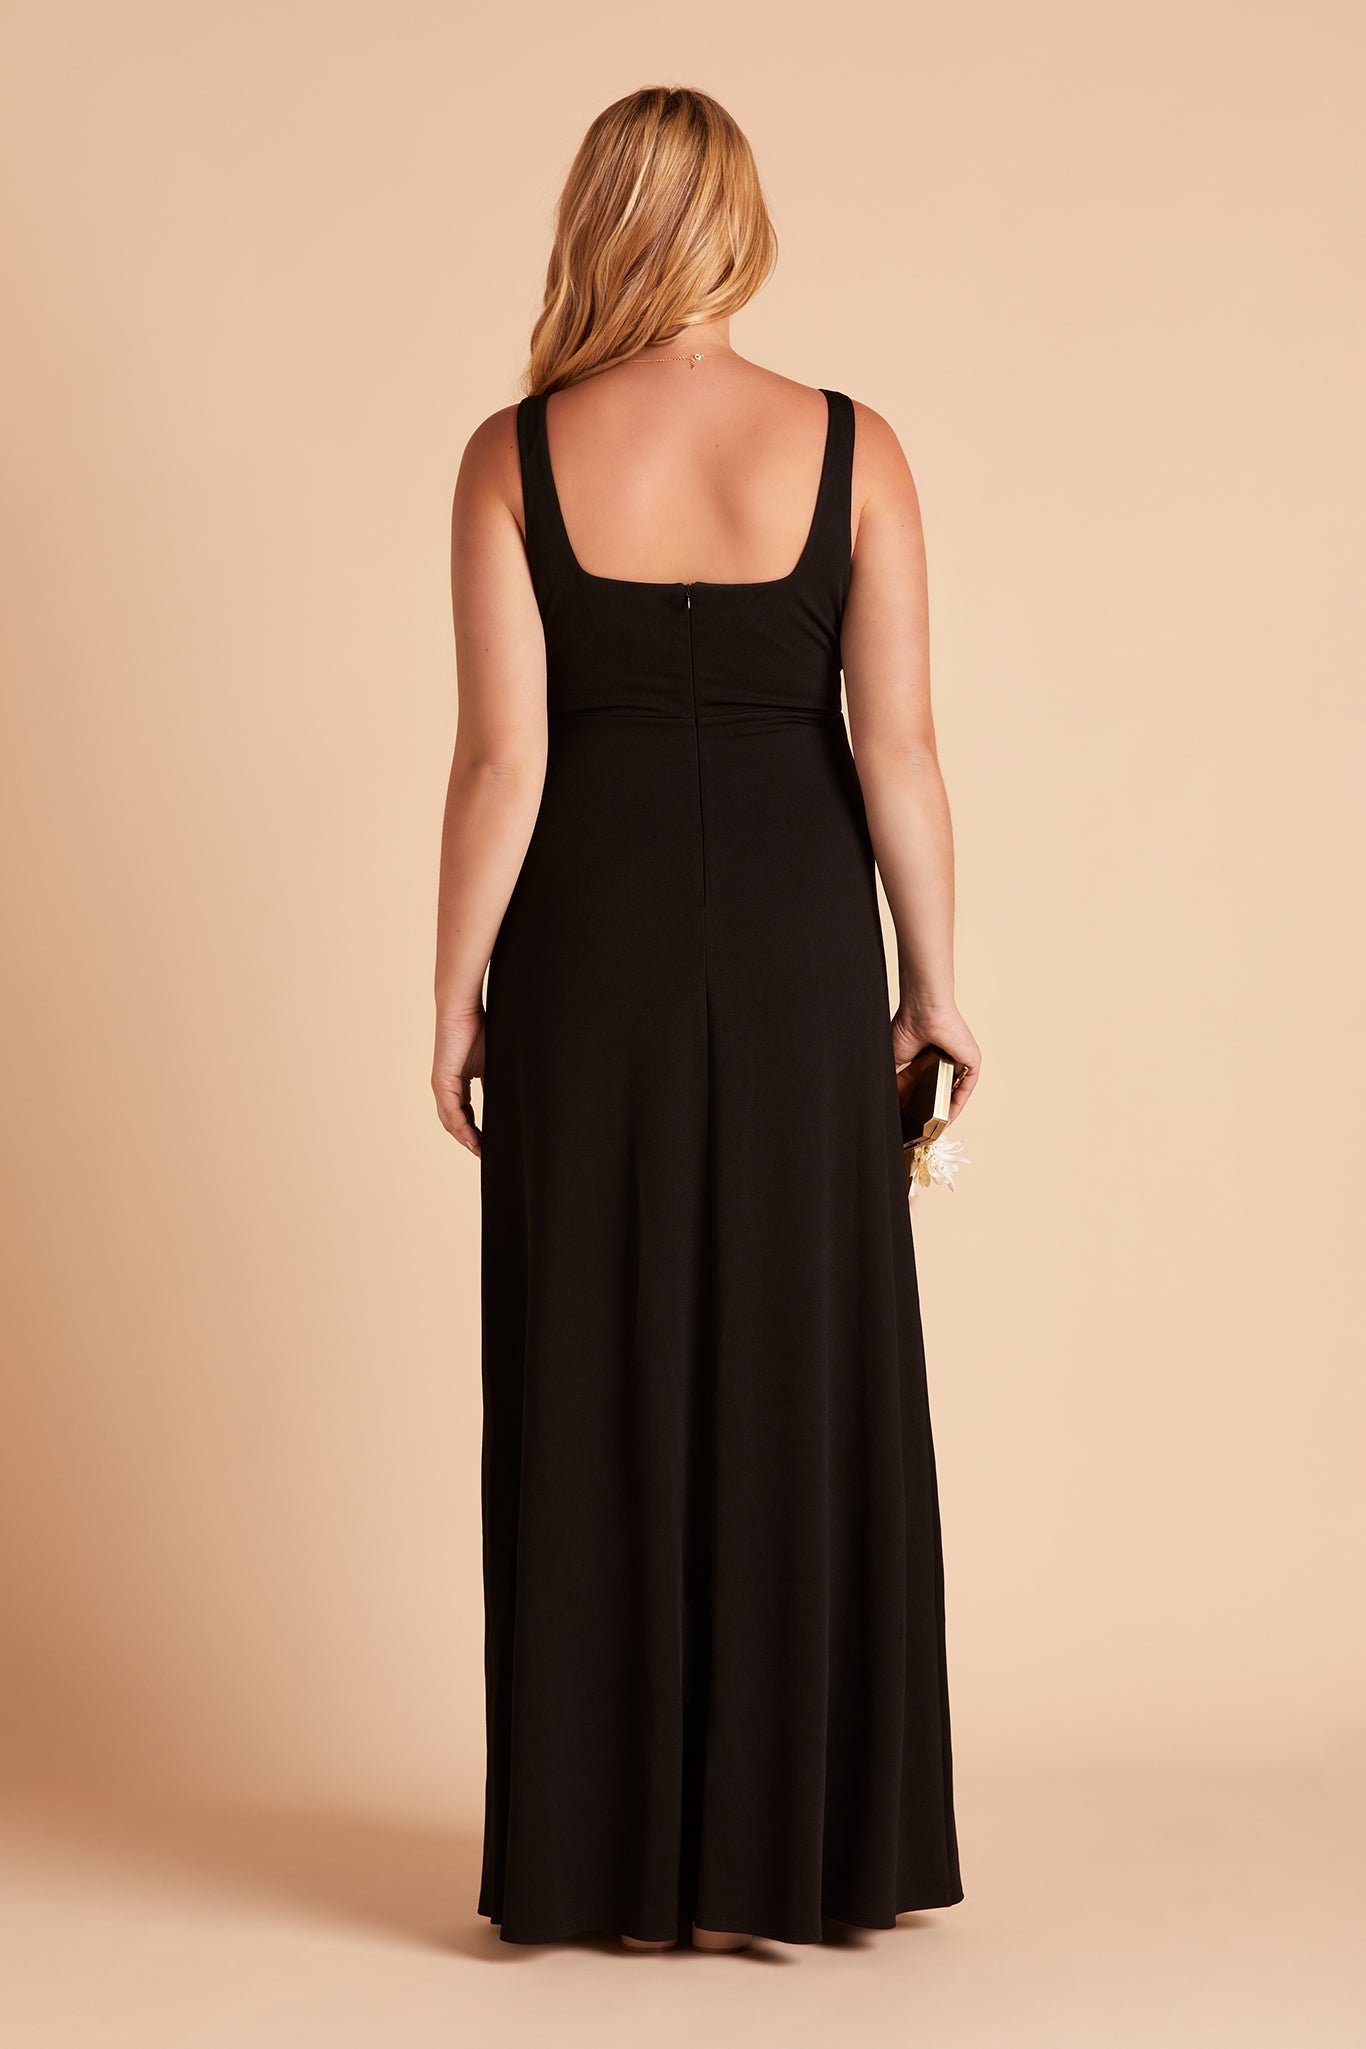 Alex convertible plus size bridesmaid dress with slit in black crepe by Birdy Grey, back view